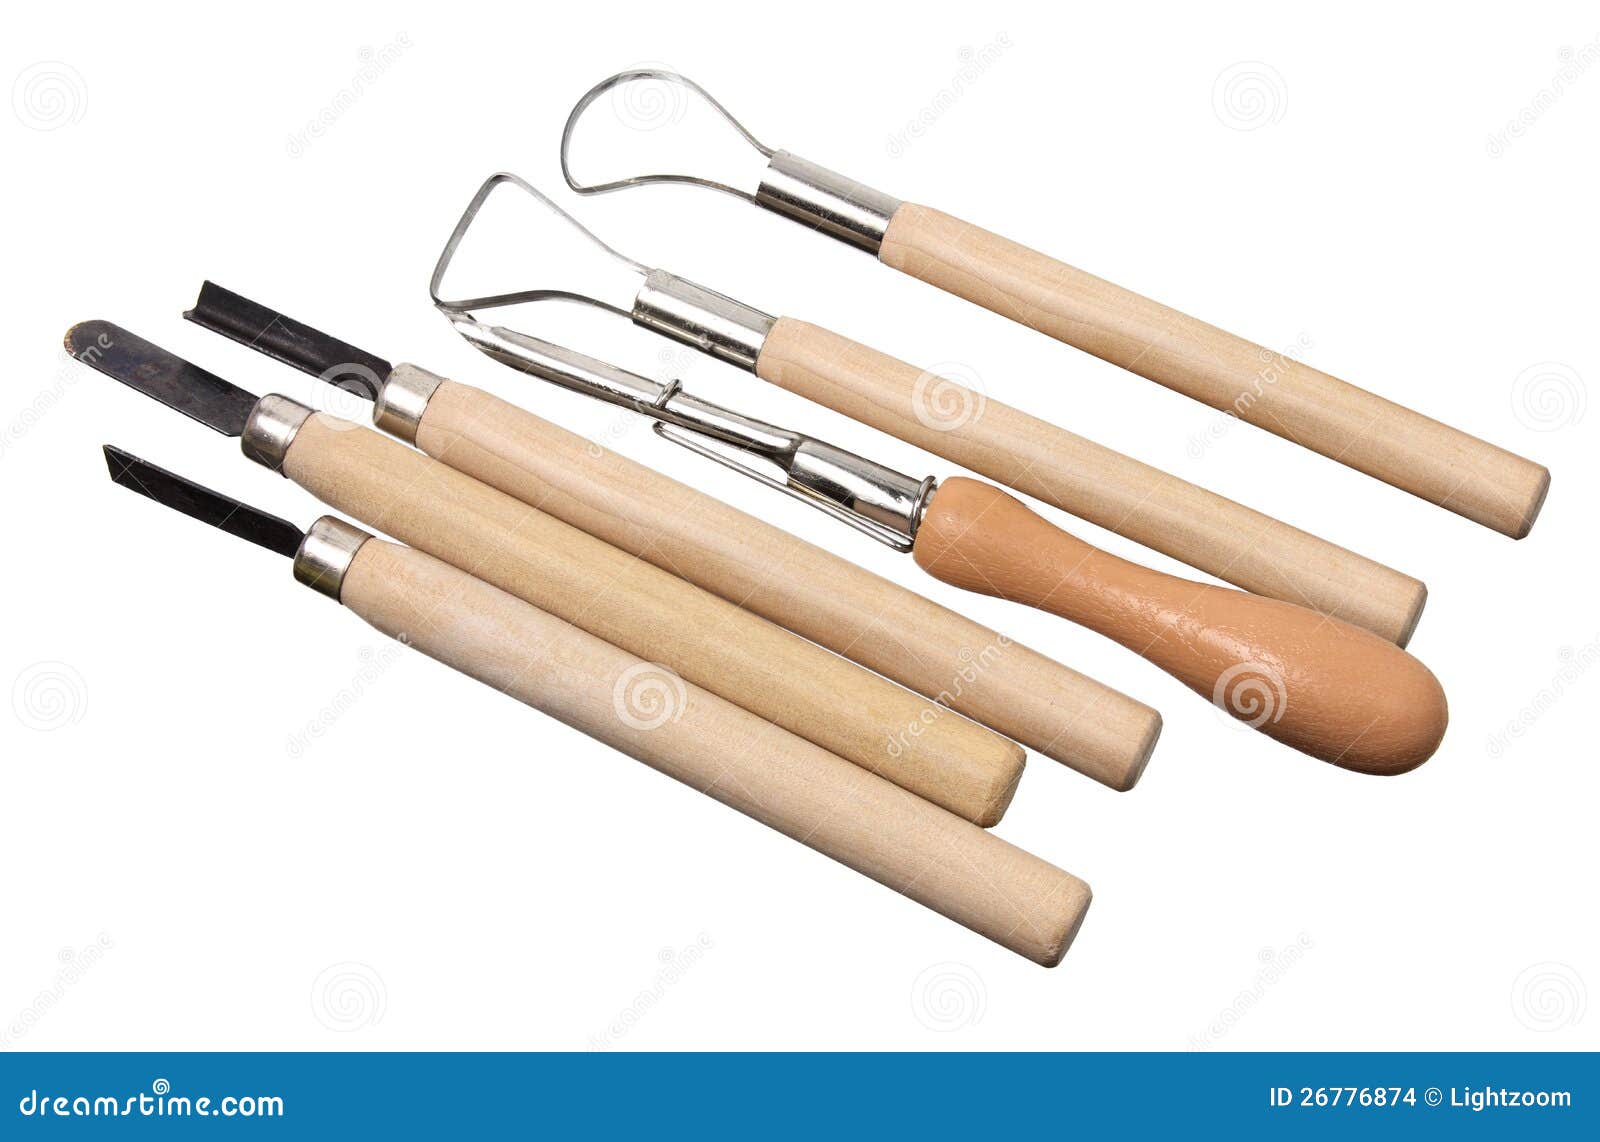 Art And Craft Tools Stock Images - Image: 26776874